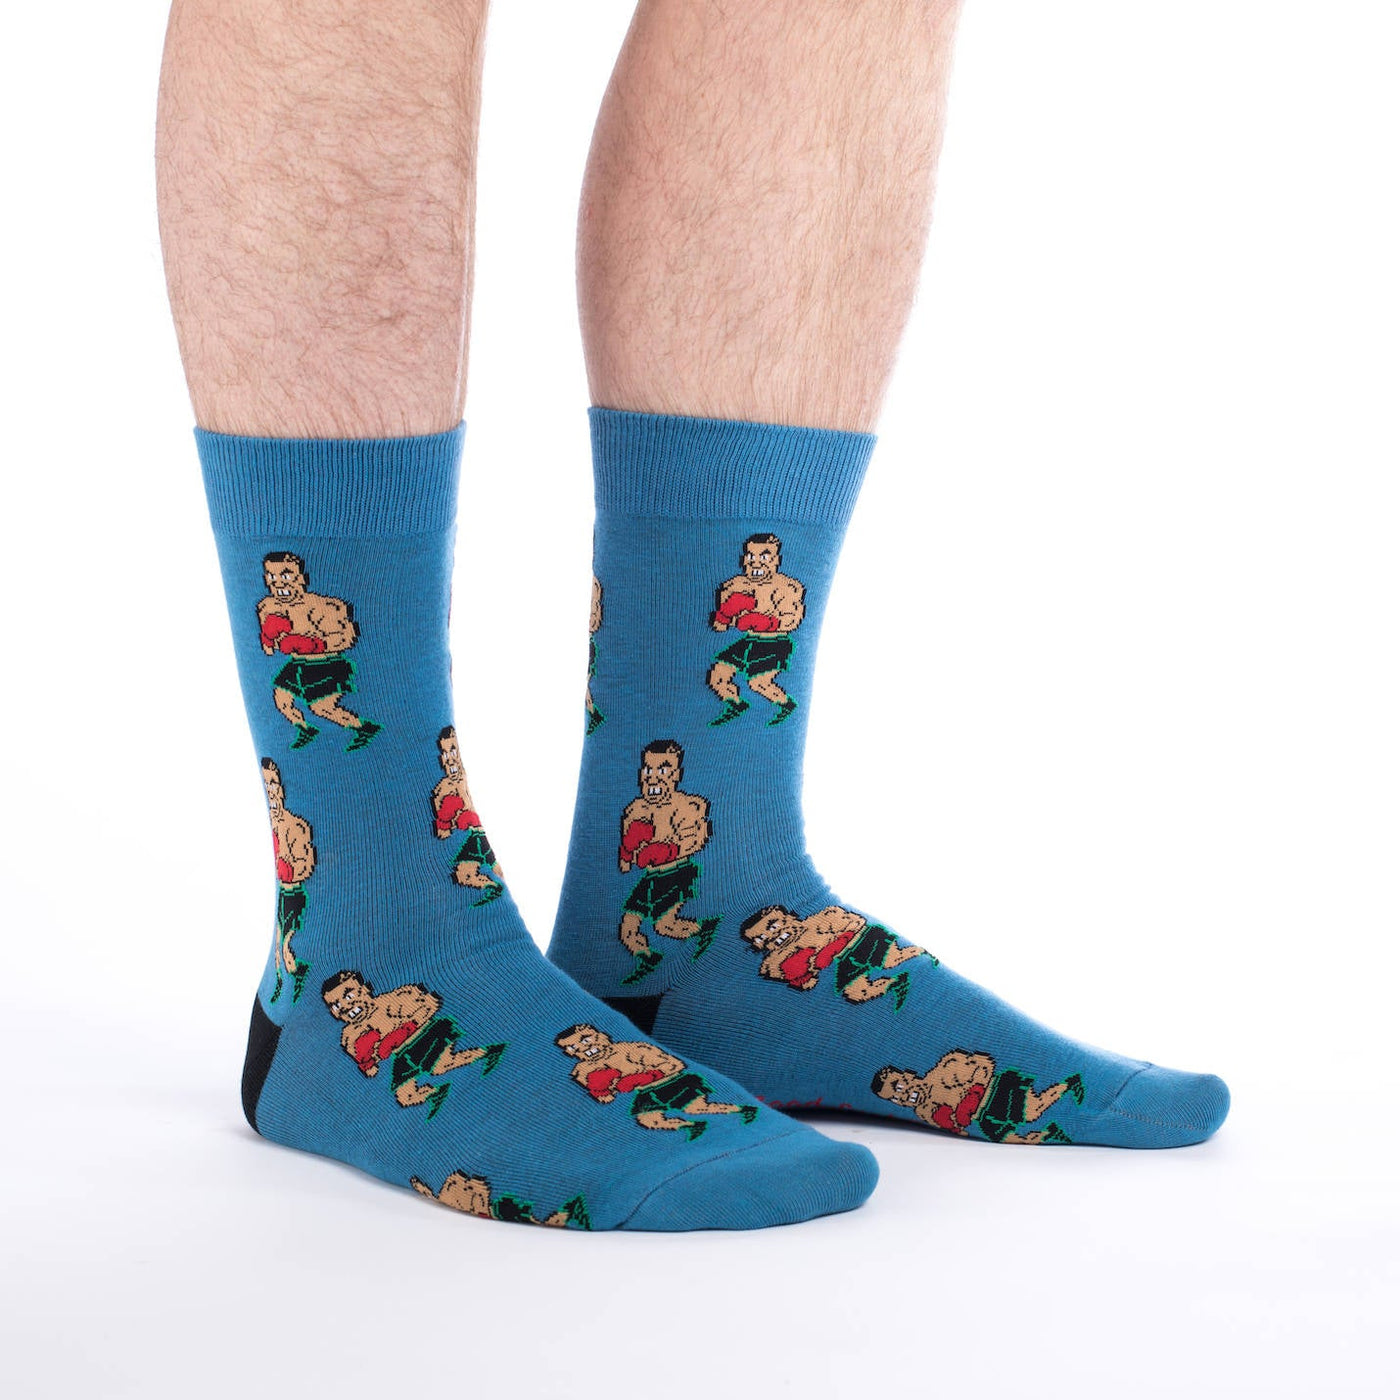 "Tyson Punch Out" Cotton Crew Socks by Good Luck Sock